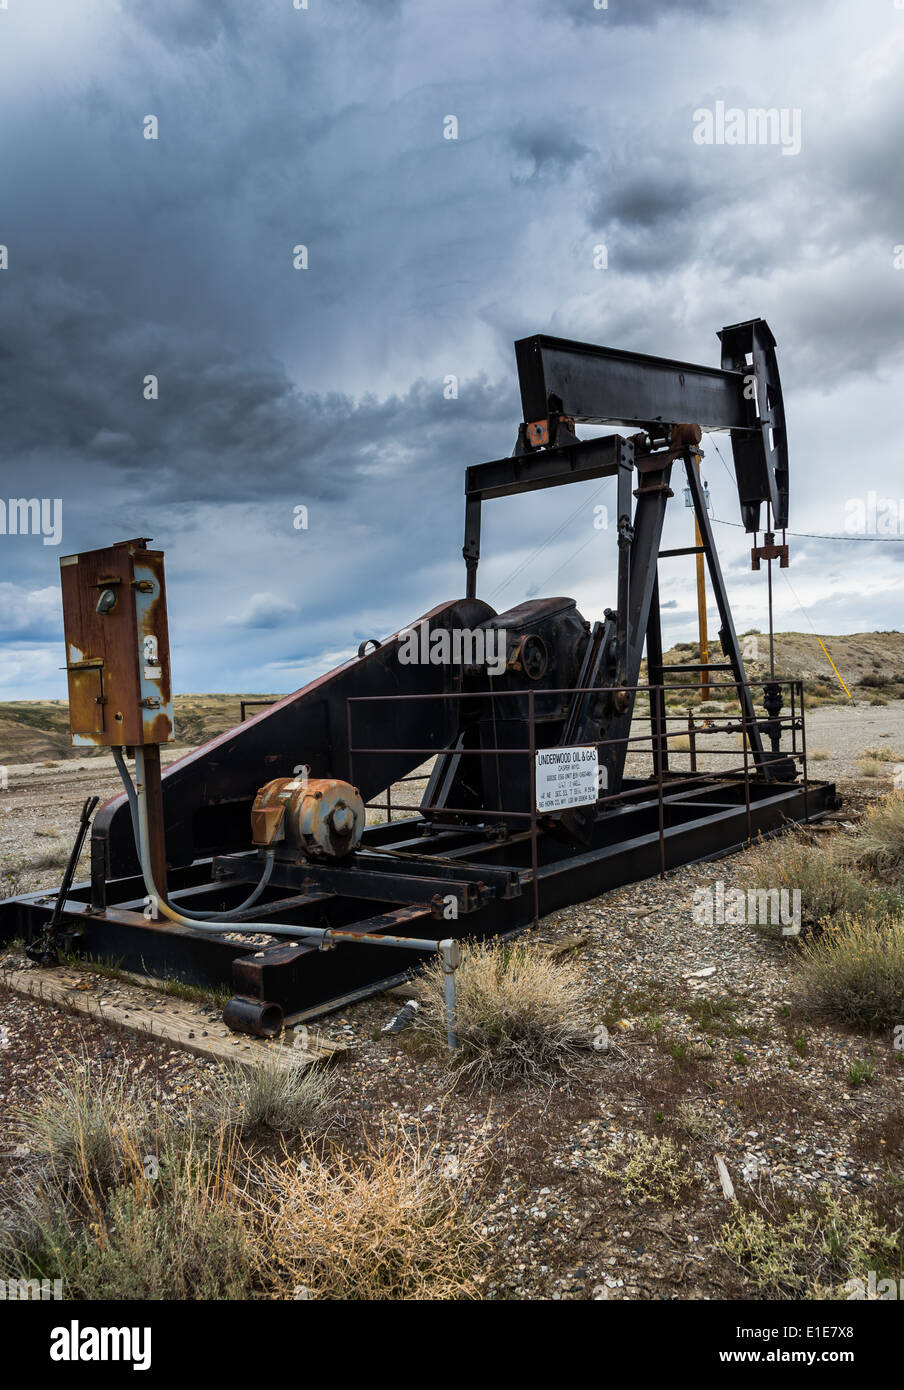 An idled oil pump-jack under dark stormy clouds. Wyoming, USA. Stock Photo